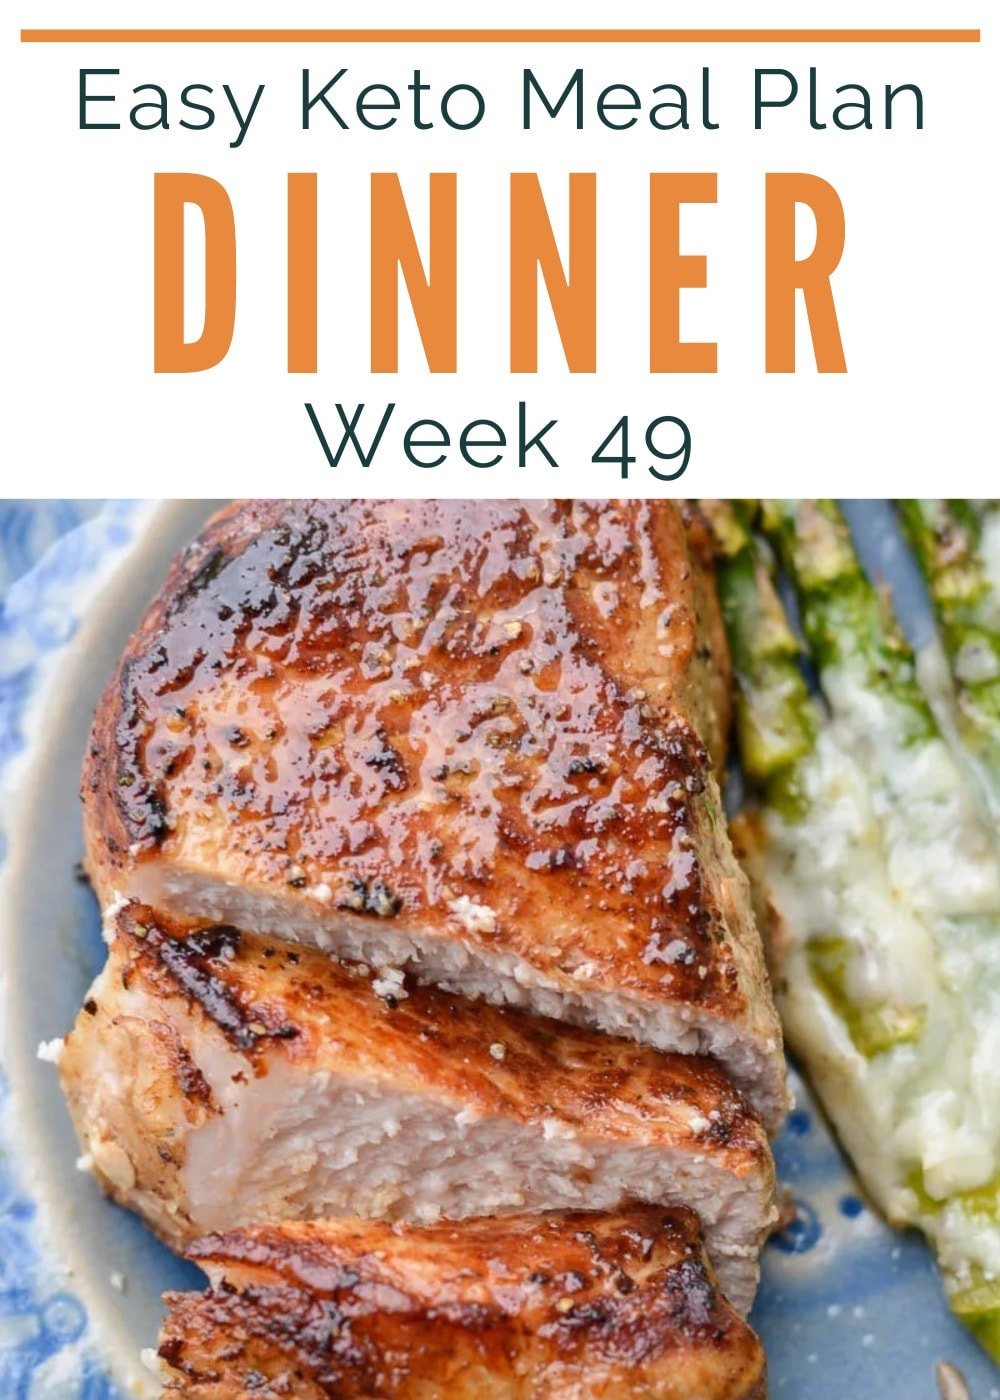 This week's keto meal plan has 5 delicious keto weeknight meals. Included is a printable shopping list, meal prep tips, and two bonus meal prep snacks!